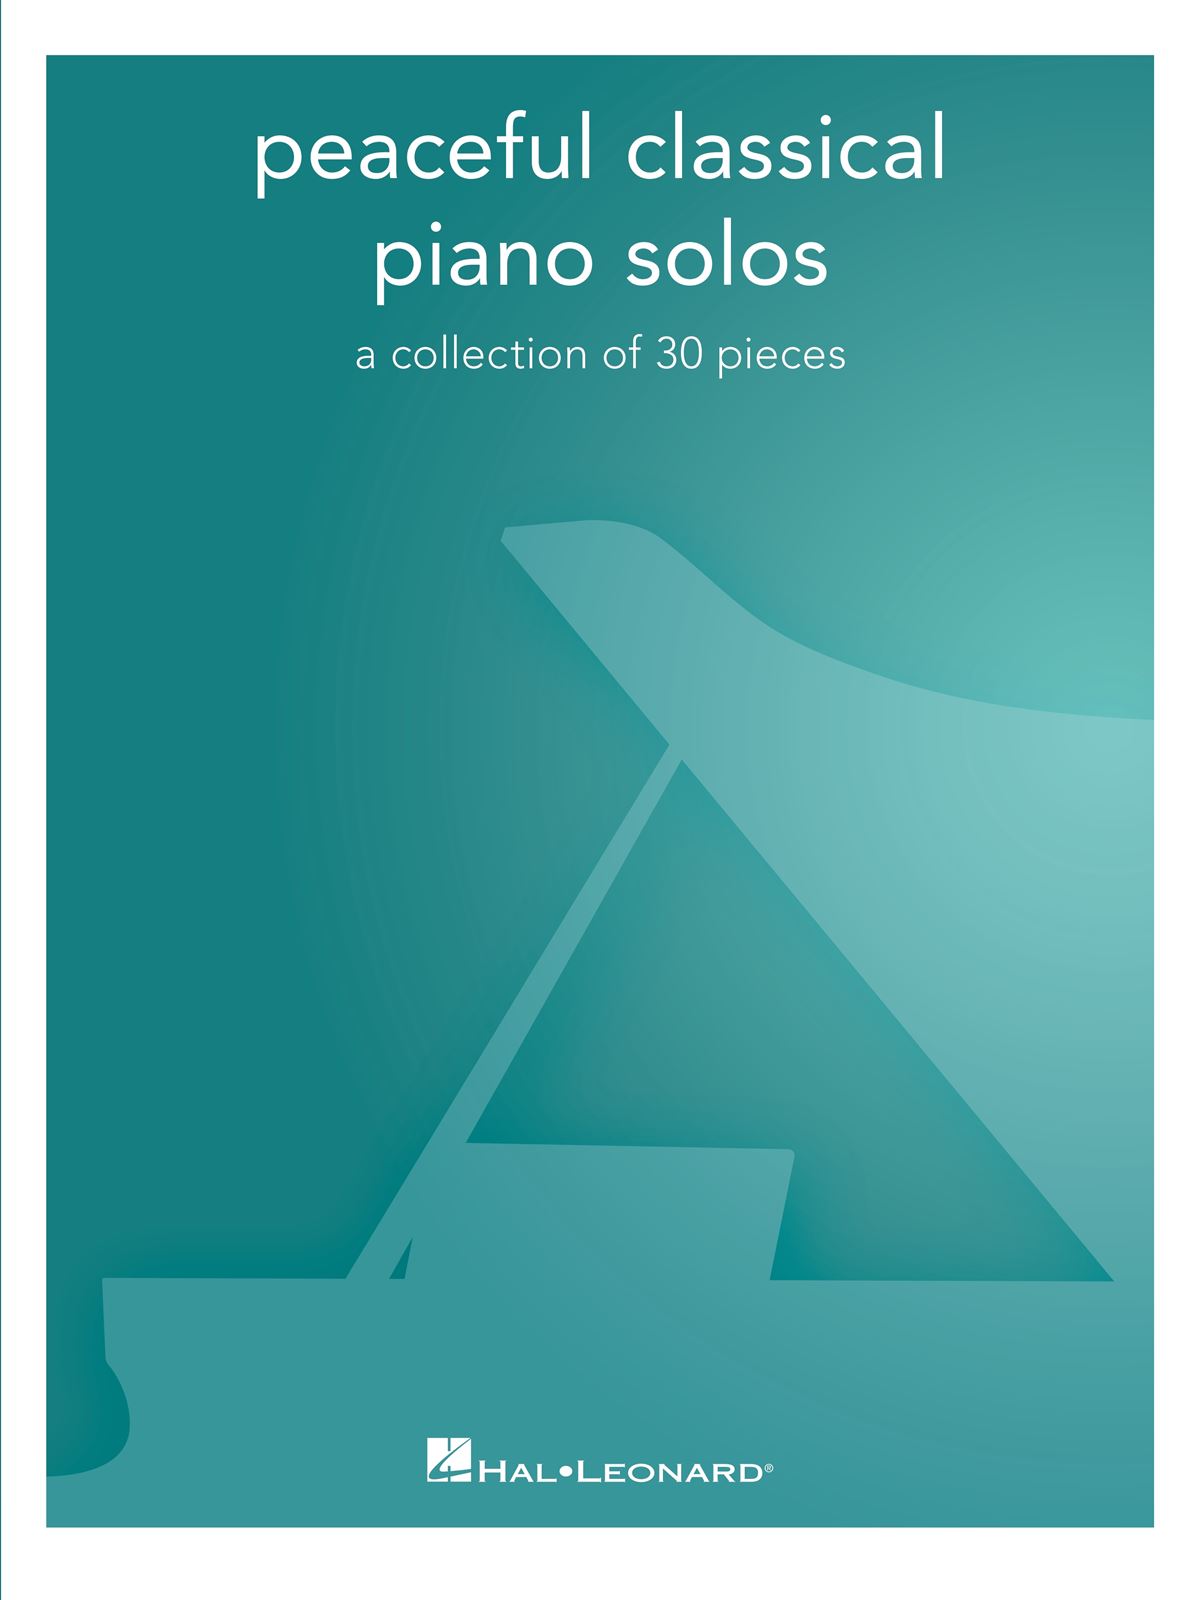 Peaceful Classical Piano Solos: a collection of 30 pieces